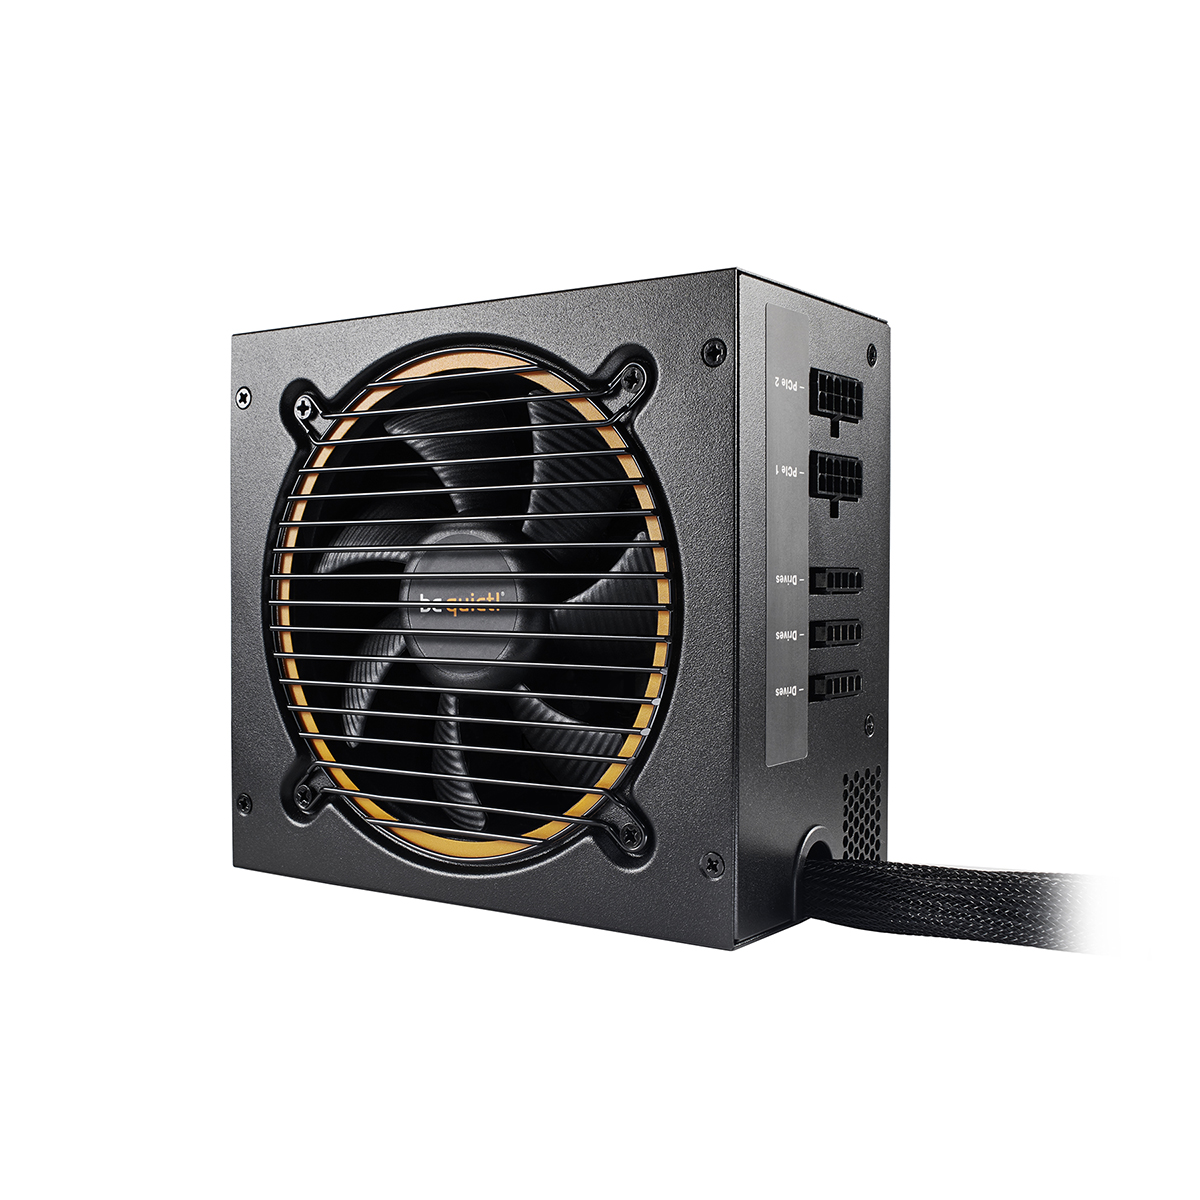 be quiet! - be quiet Pure Power 11 500W 80 Plus Gold Modular Power Supply